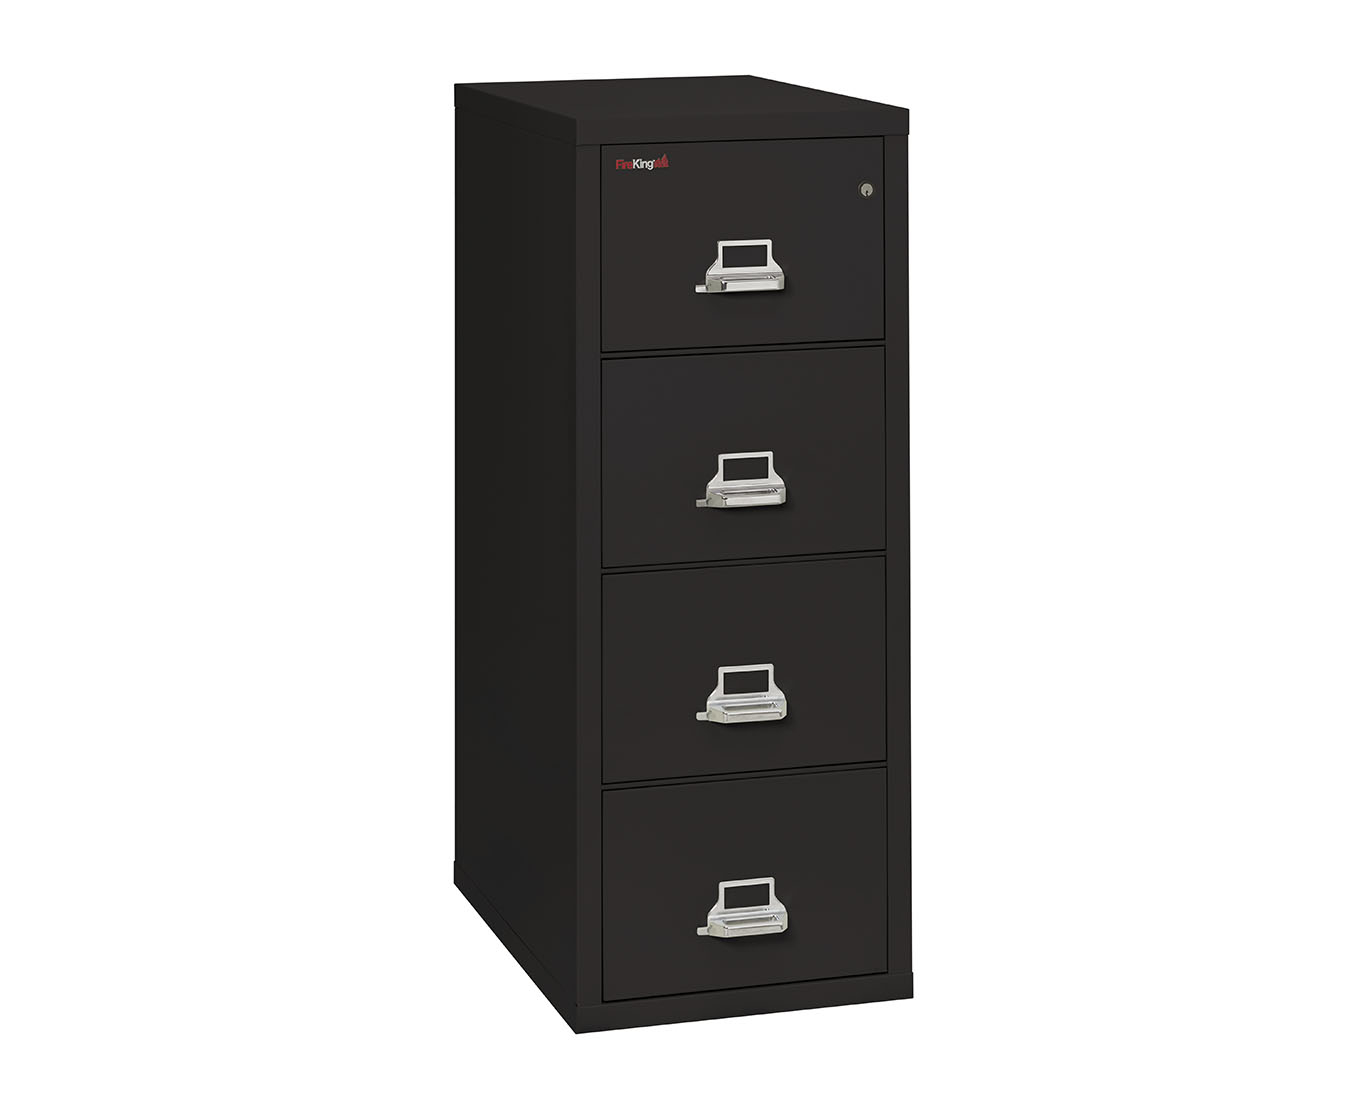 Classic Vertical File Cabinets Fireking Security Group intended for size 1366 X 1110